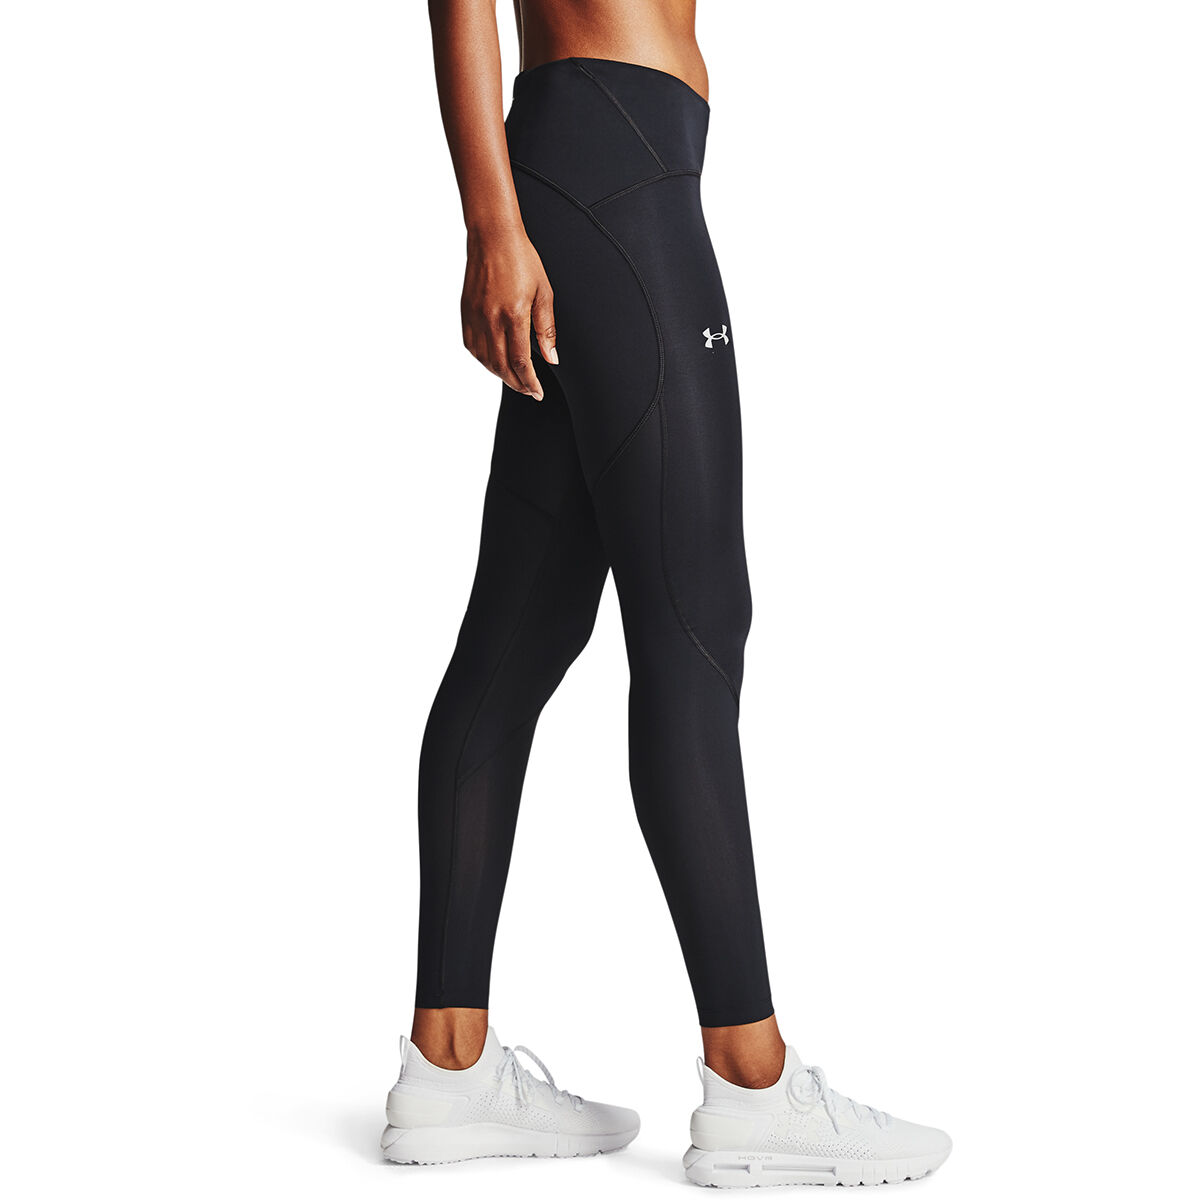 Women's Under Armour Heat Gear Compression Leggings Tights 3/4 Black Large